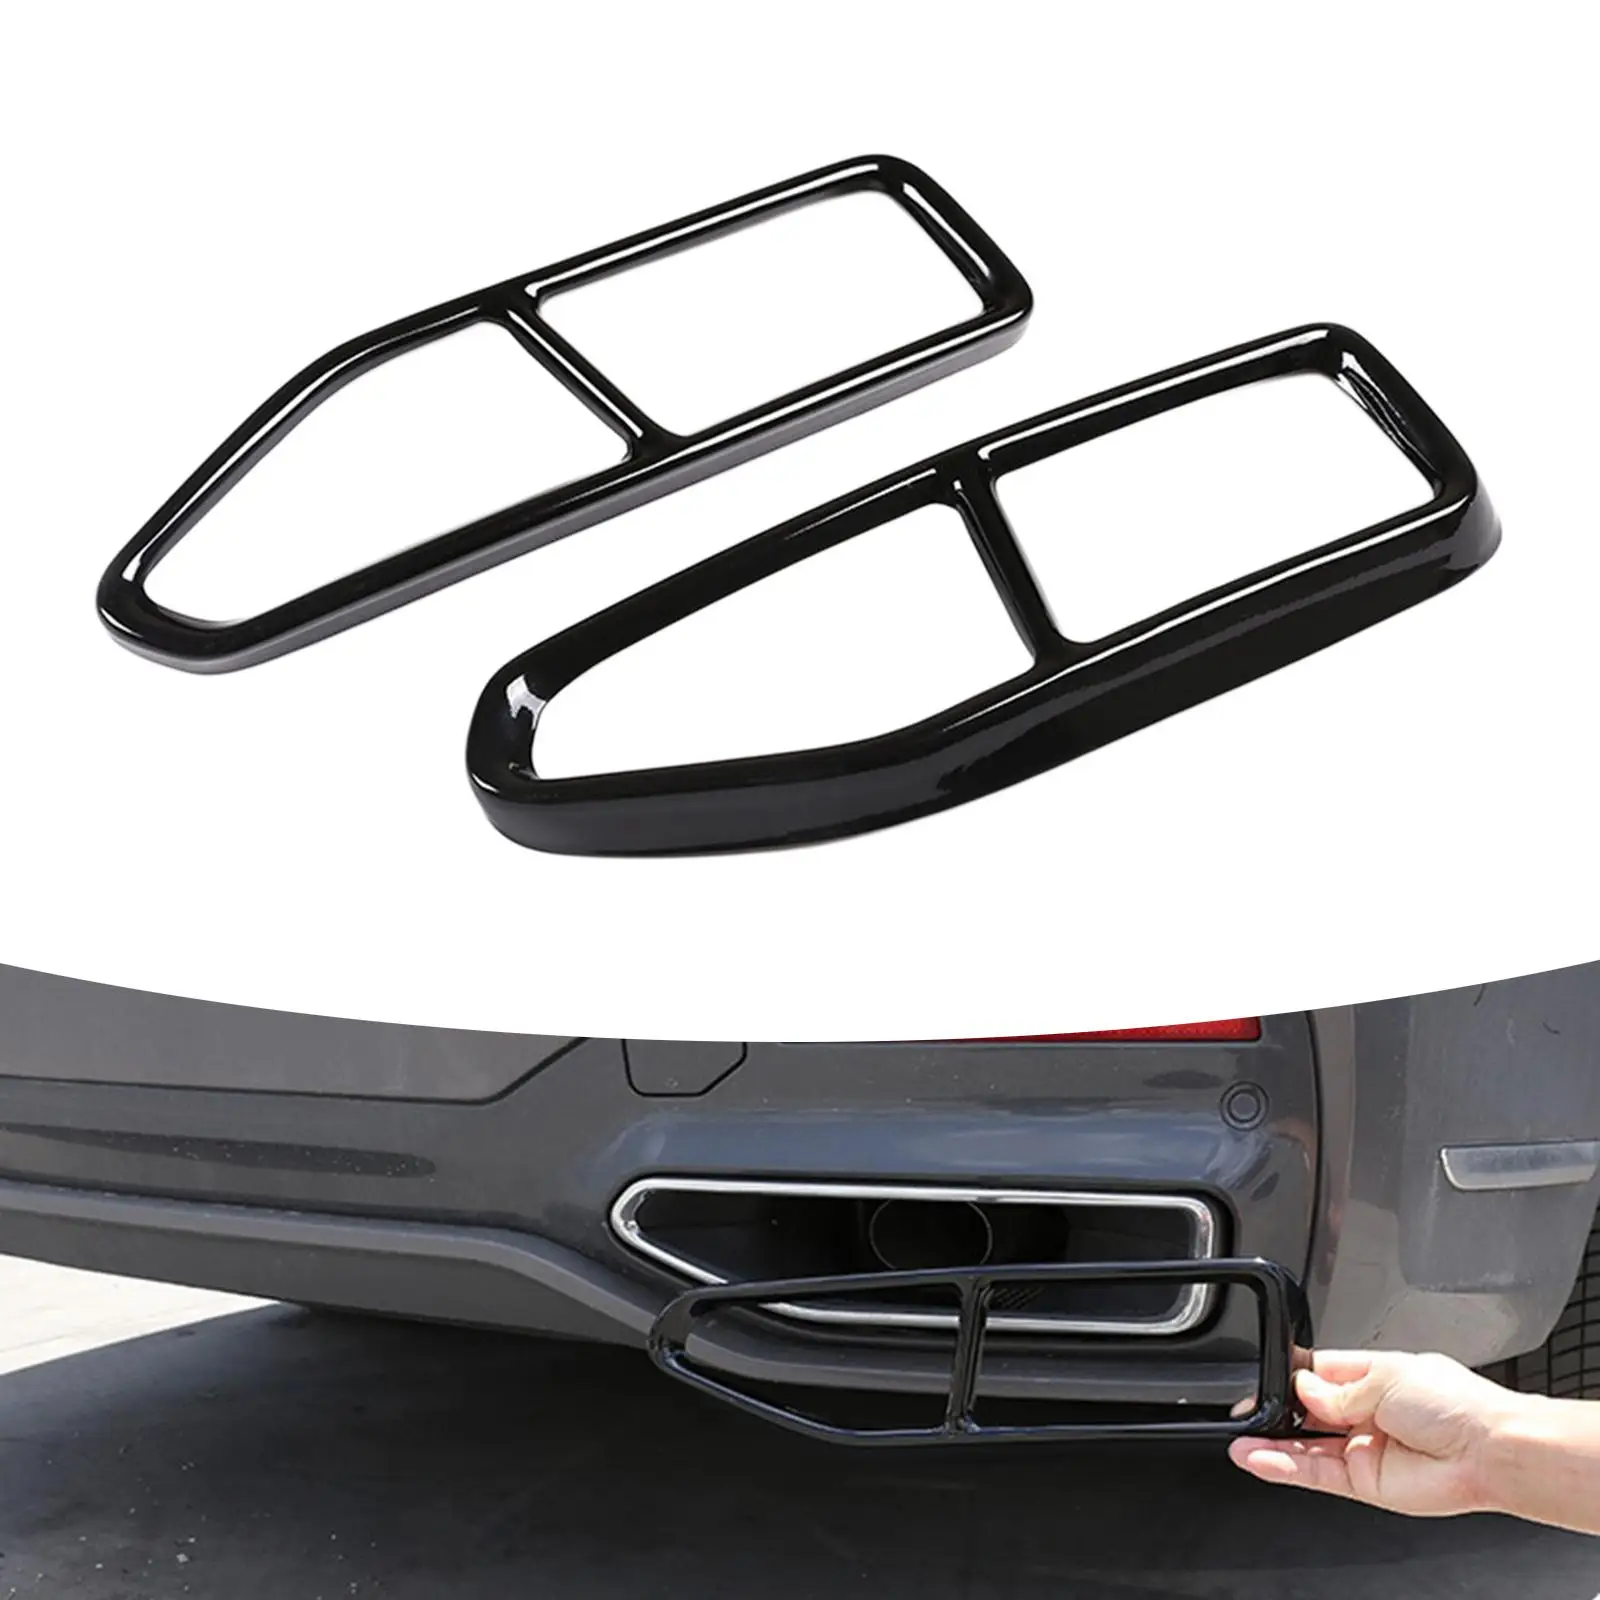 2x Tailpipe Trim Frame Rustproof Protection Cover Weatherproof Exhaust Pipe Output Cover for BMW 7 G11 G12 Auto Accessories